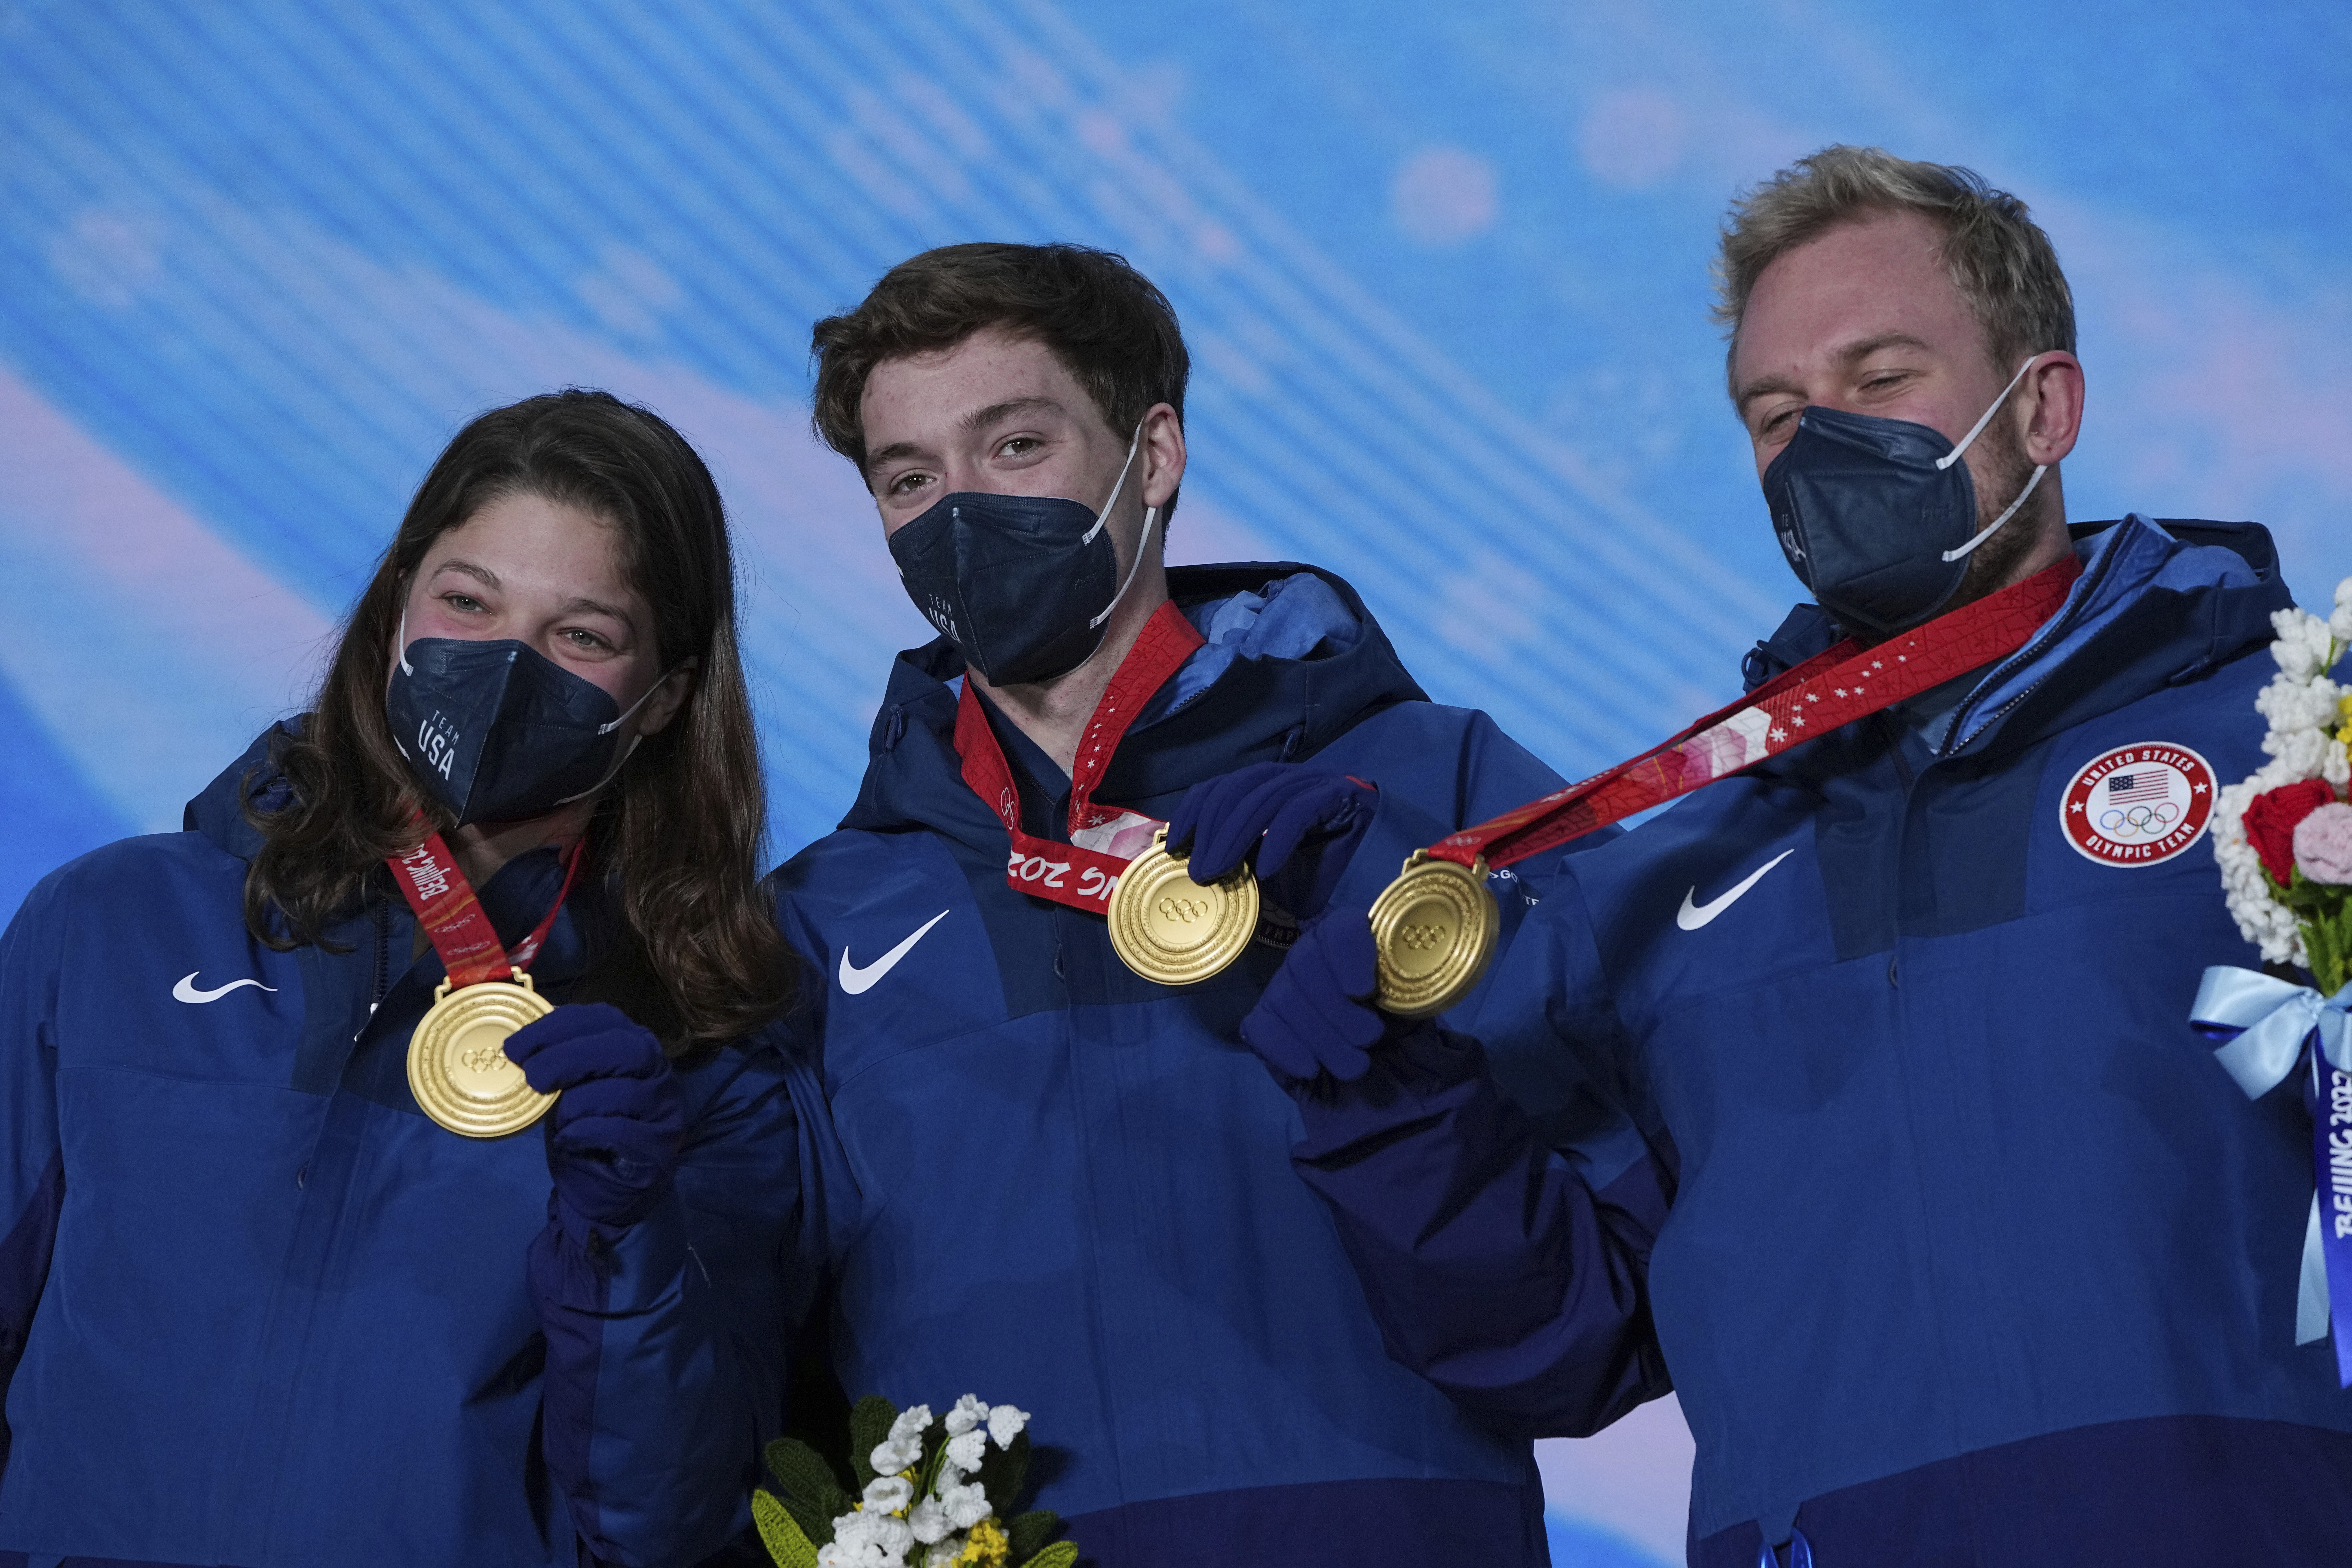 <p>Gold medalists United States&#8217; Ashley Caldwell, Christopher Lillis and Justin Schoenefeld celebrate during a medal ceremony for the mixed team aerials at the 2022 Winter Olympics, Friday, Feb. 11, 2022, in Zhangjiakou, China.</p>
